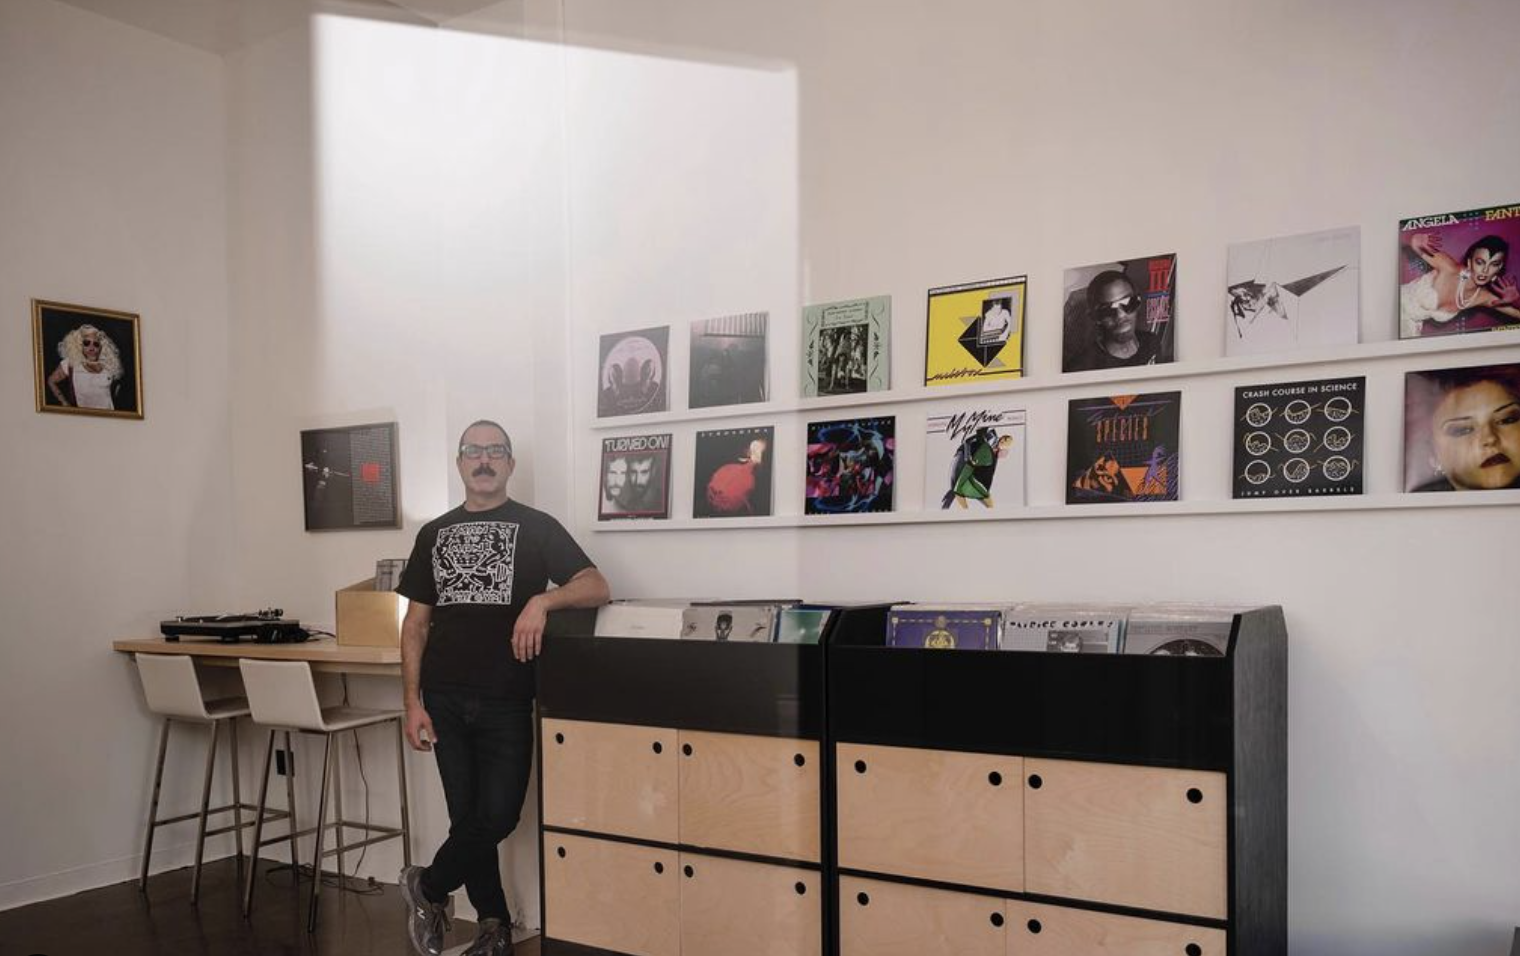 Dark Entries is opening a record store in San Francisco